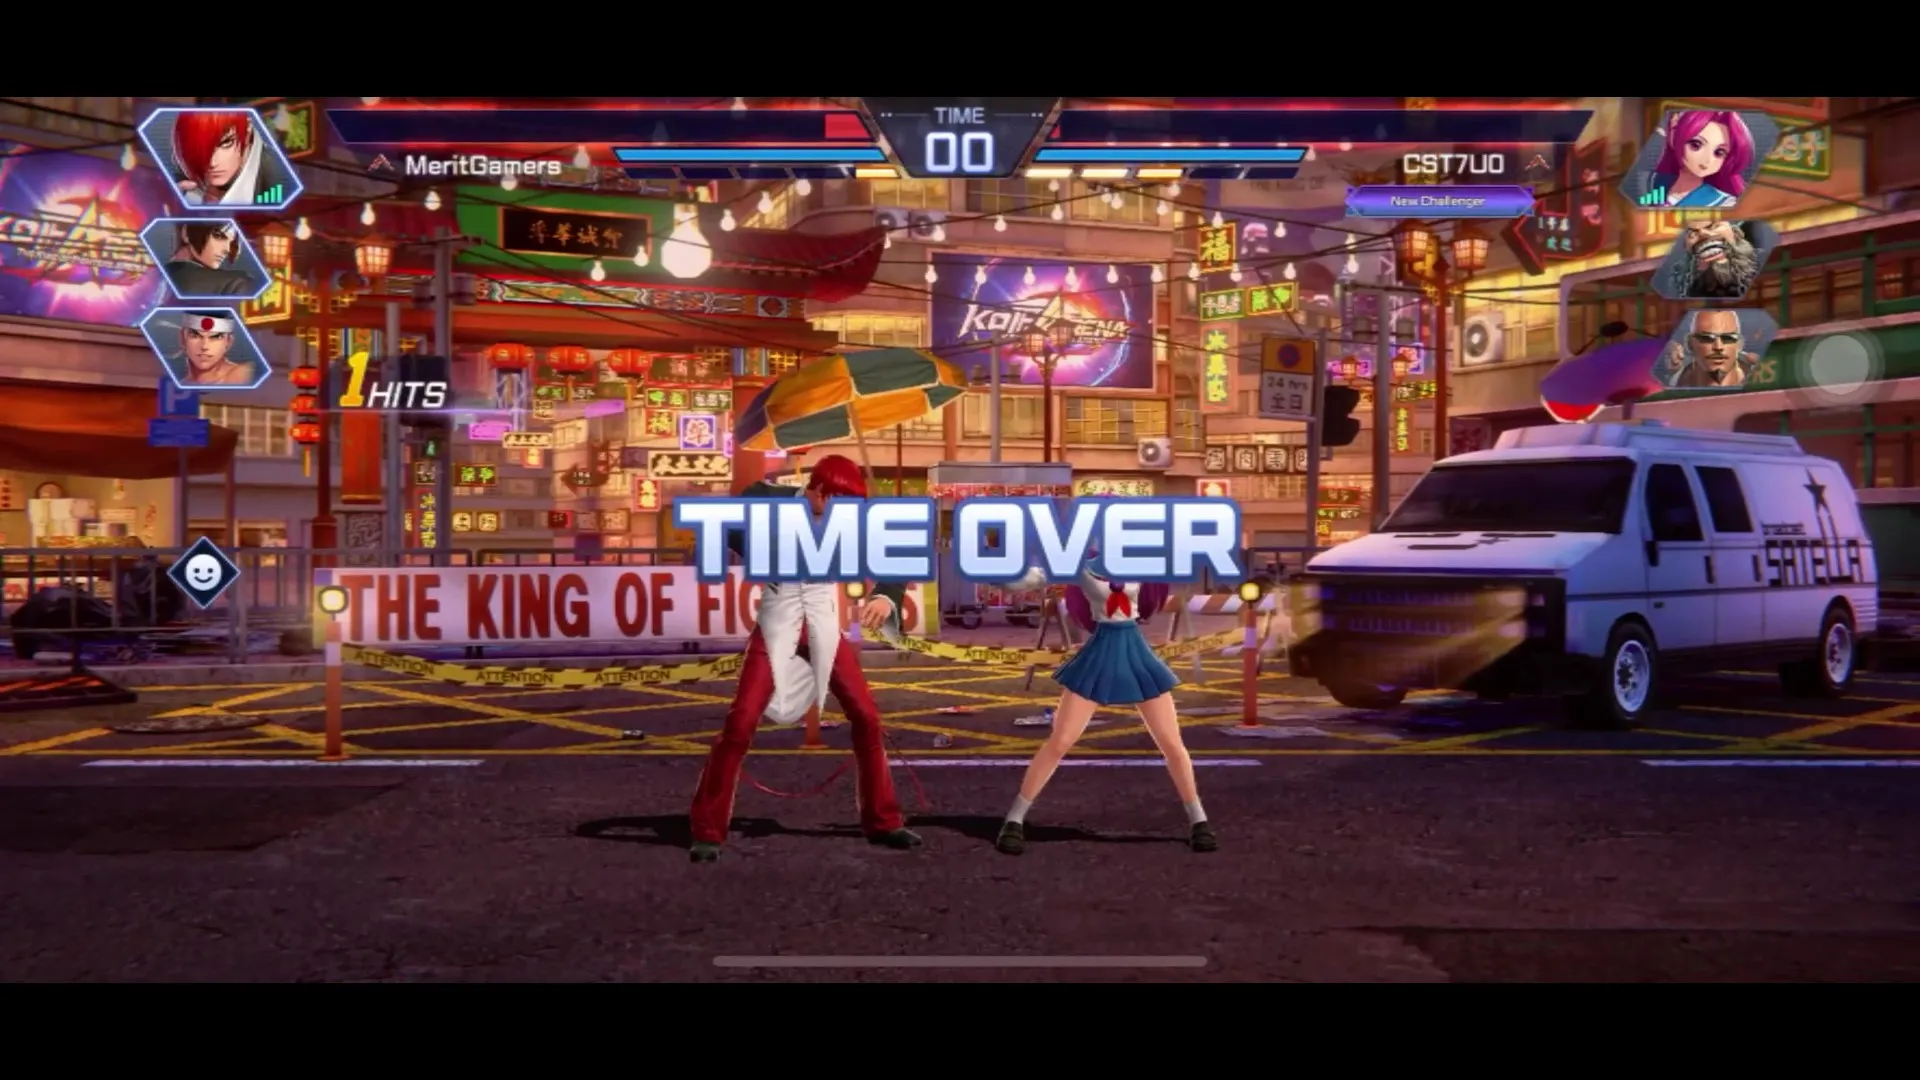 In KOF Arena, each round lasts 60 seconds. If both players are still alive after 60 seconds, the round is won by the player with the most health remaining.